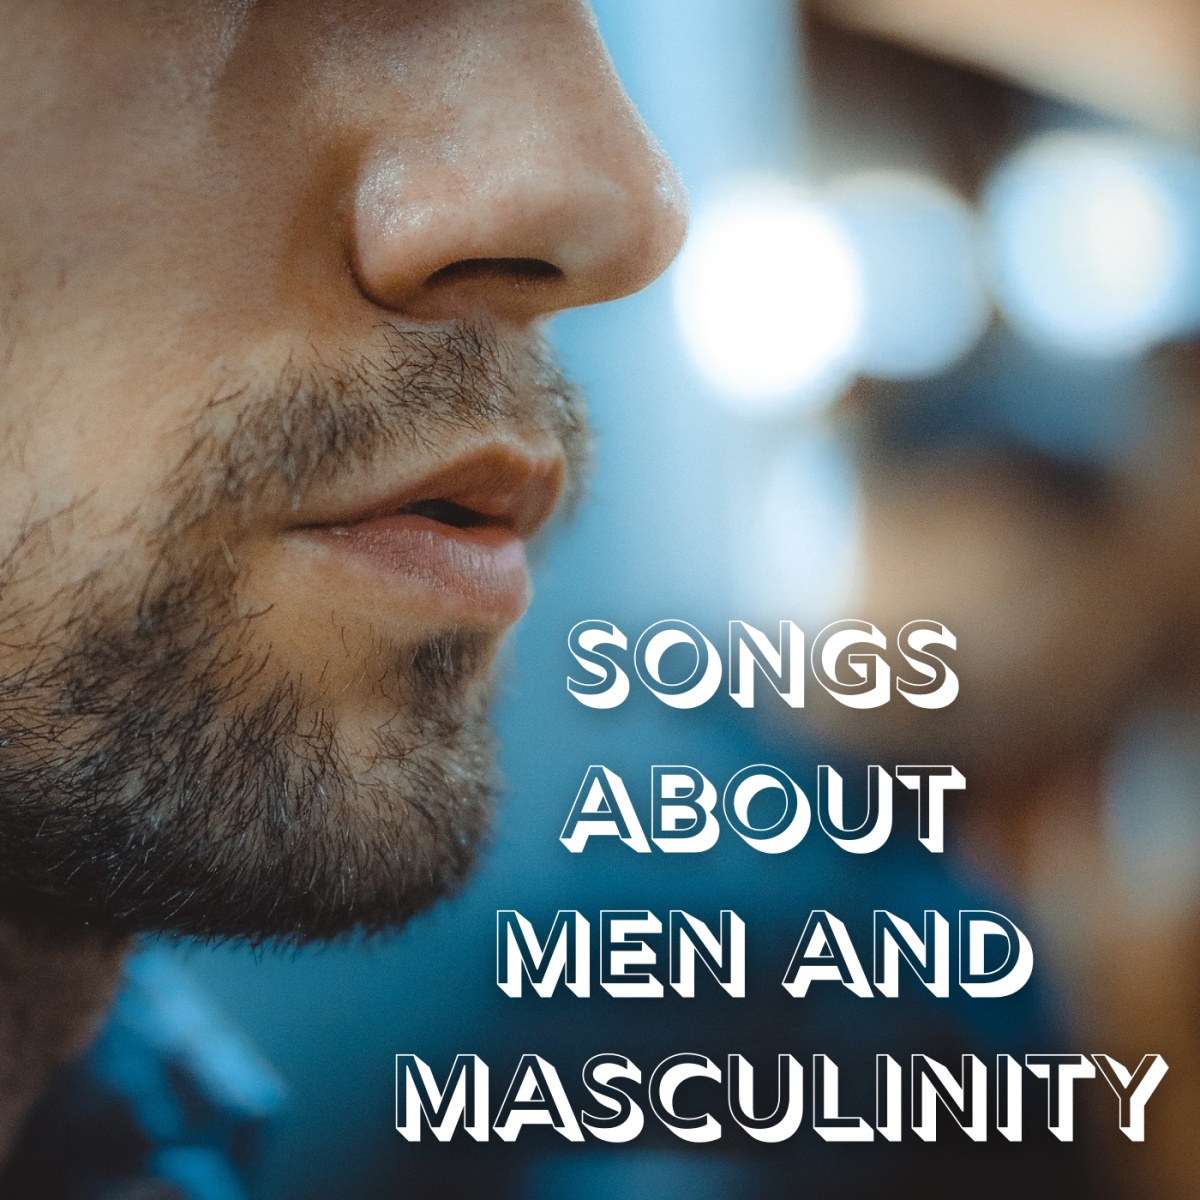 Hey there, manly man! Here's a shout out to you. Celebrate men, masculinity, and being a man with a playlist of pop, rock, hip hop, R&B, and country songs about guys.